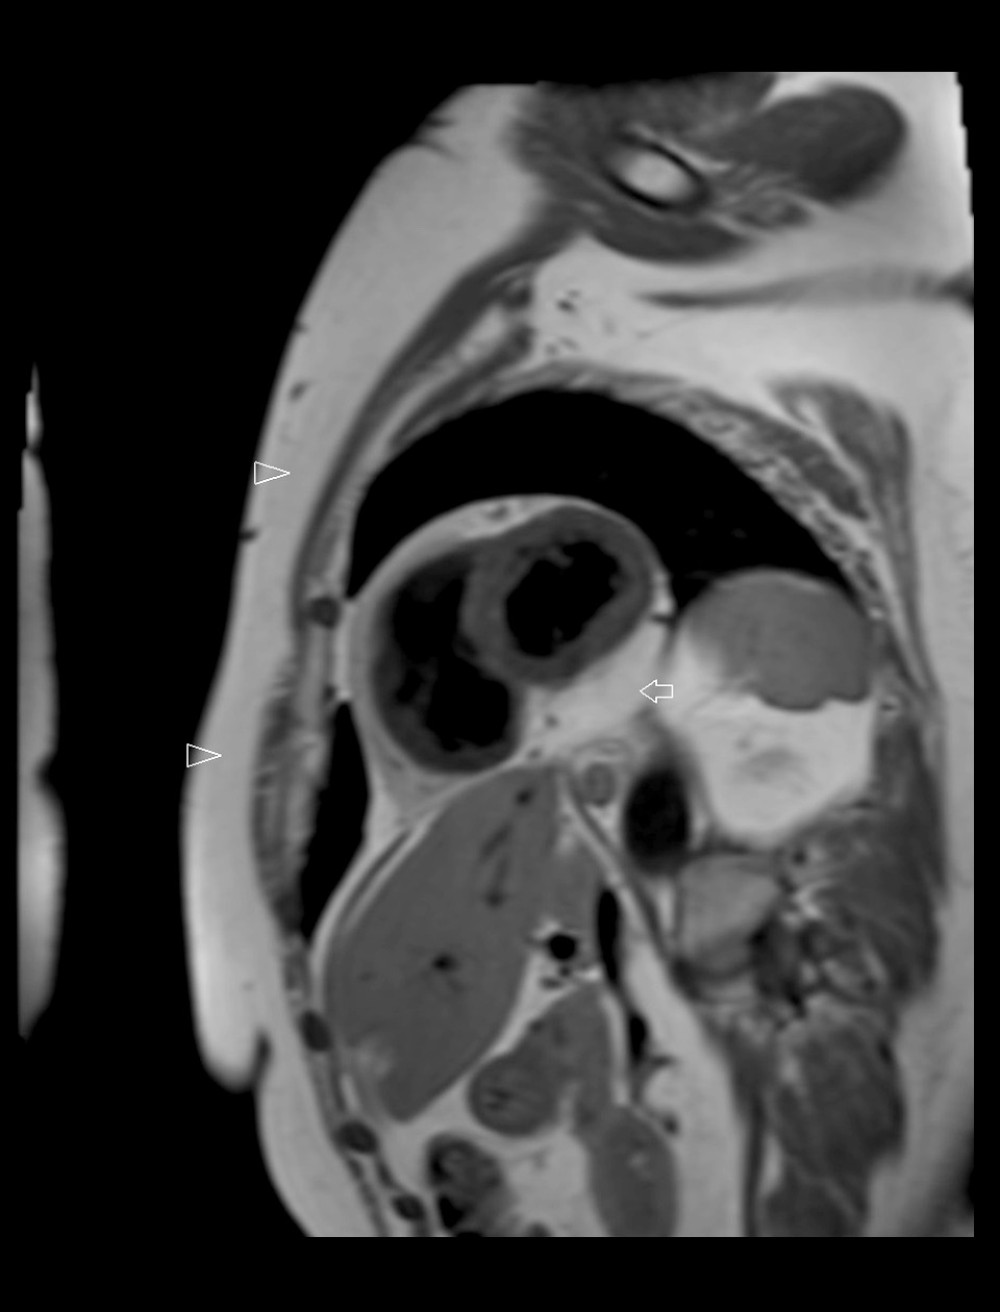 T1-weighted magnetic resonance imaging shows a large mass (arrow) in the pericardial cavity with homogeneous high signal intensity in relation to the myocardium and same signal intensity with chest wall fat tissue (arrowheads).